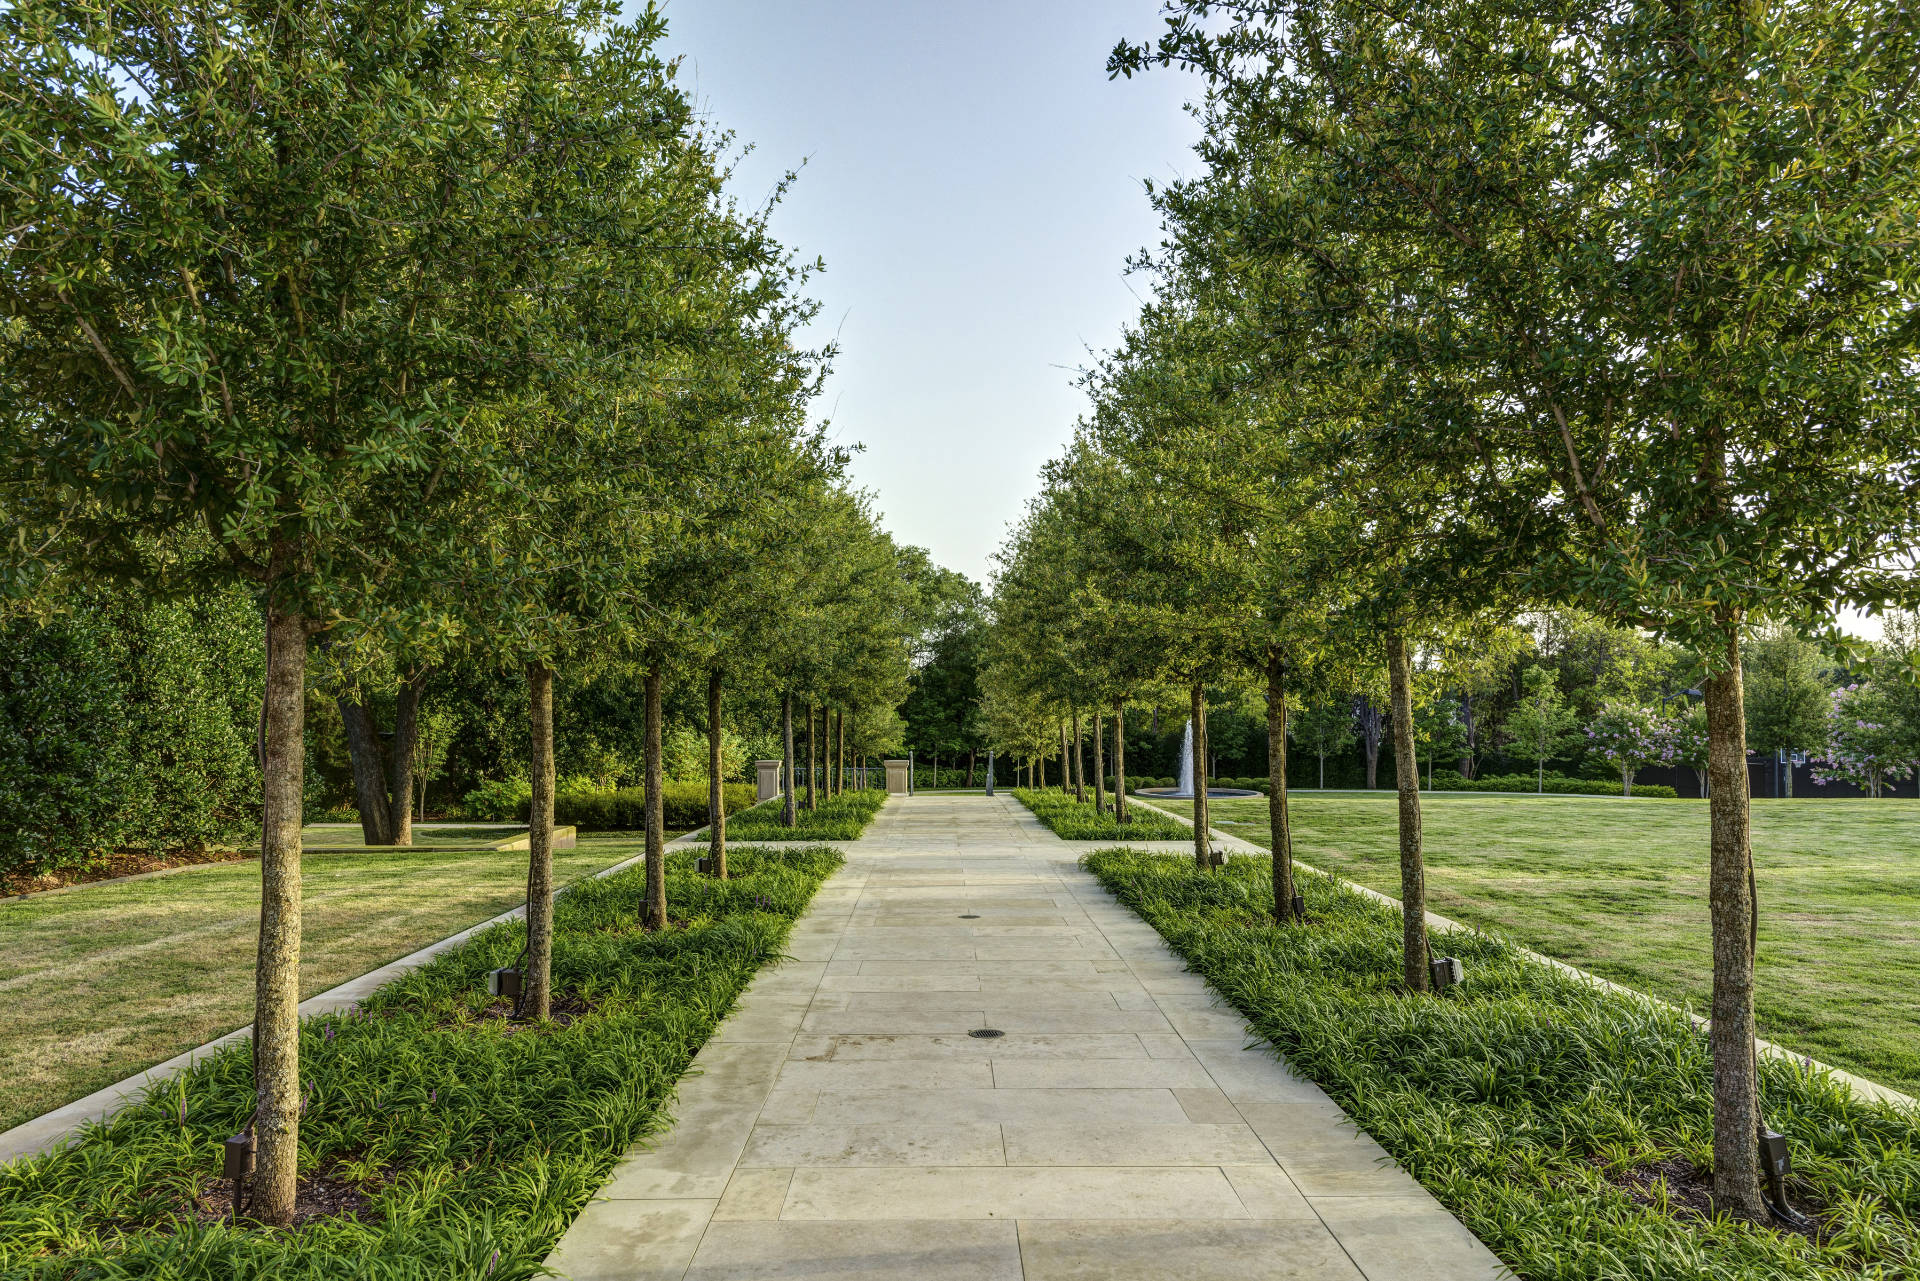 A stone walkway surrounded by a line of well maintained trees in a custom designed landscape at a Preston Hollow Property in Dallas, Texas.